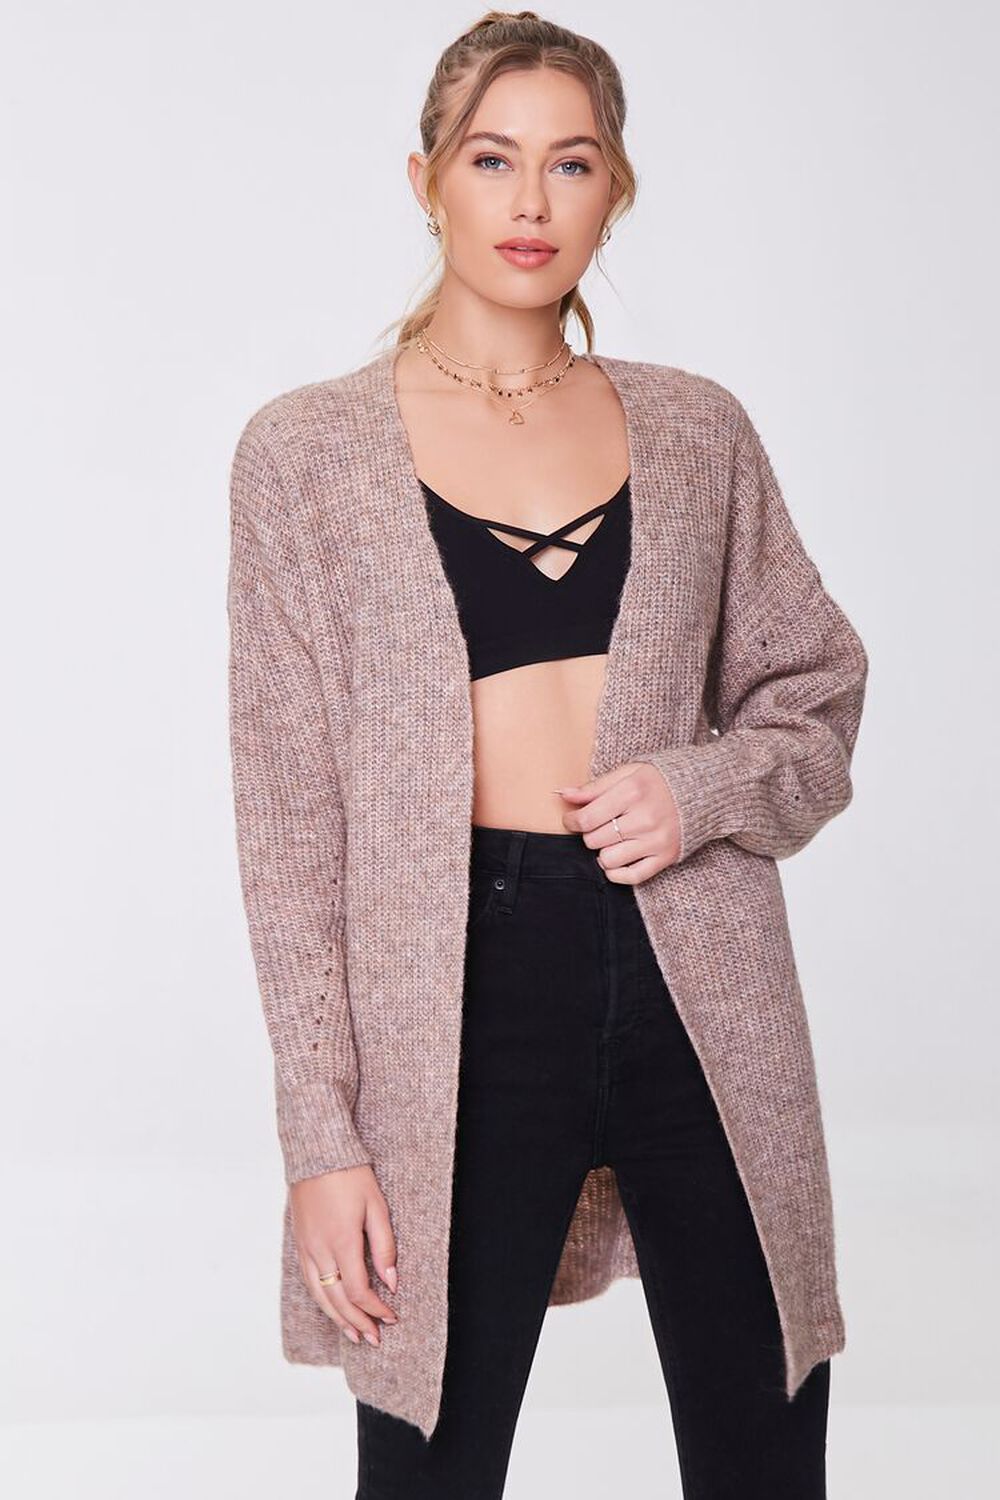 DARK BROWN Marled Open-Front Cardigan Sweater, image 1